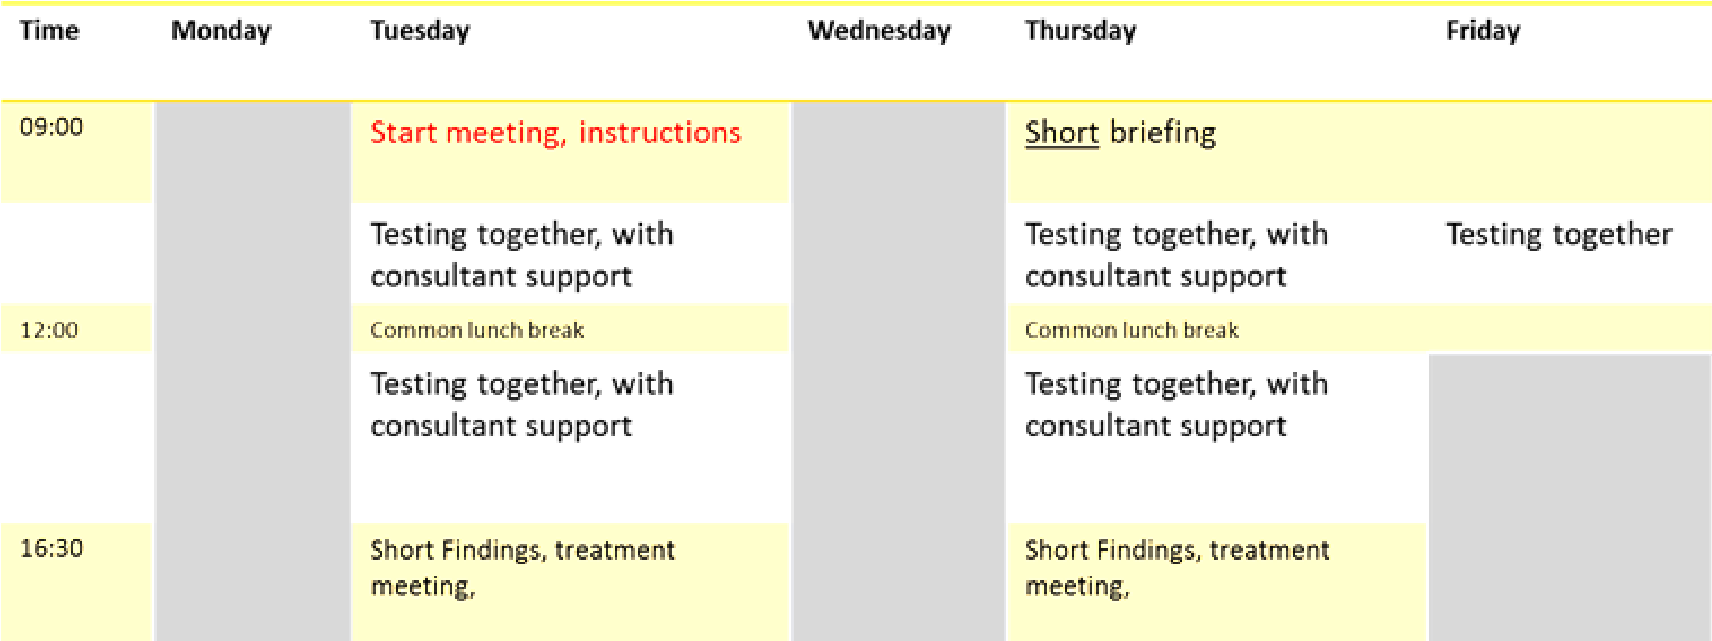 Projecttop testing schedule - testing schedule